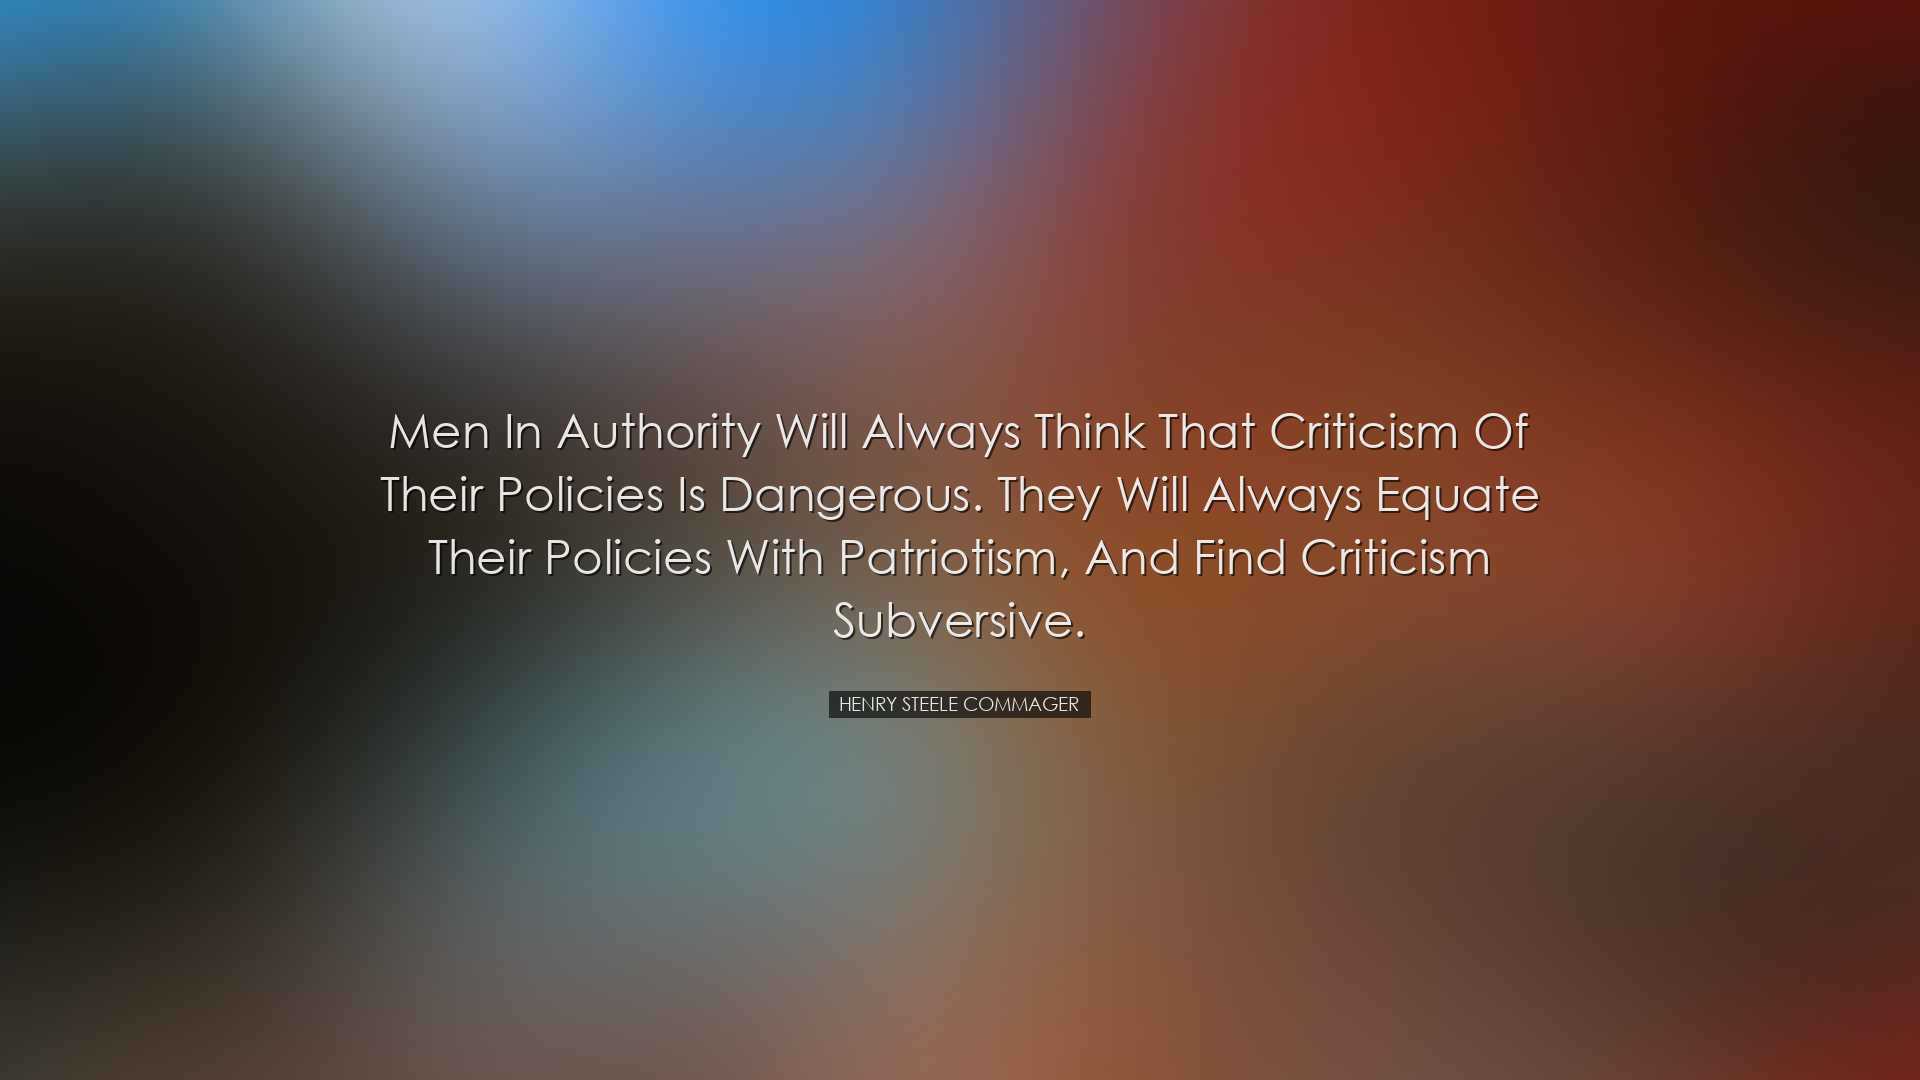 Men in authority will always think that criticism of their policie